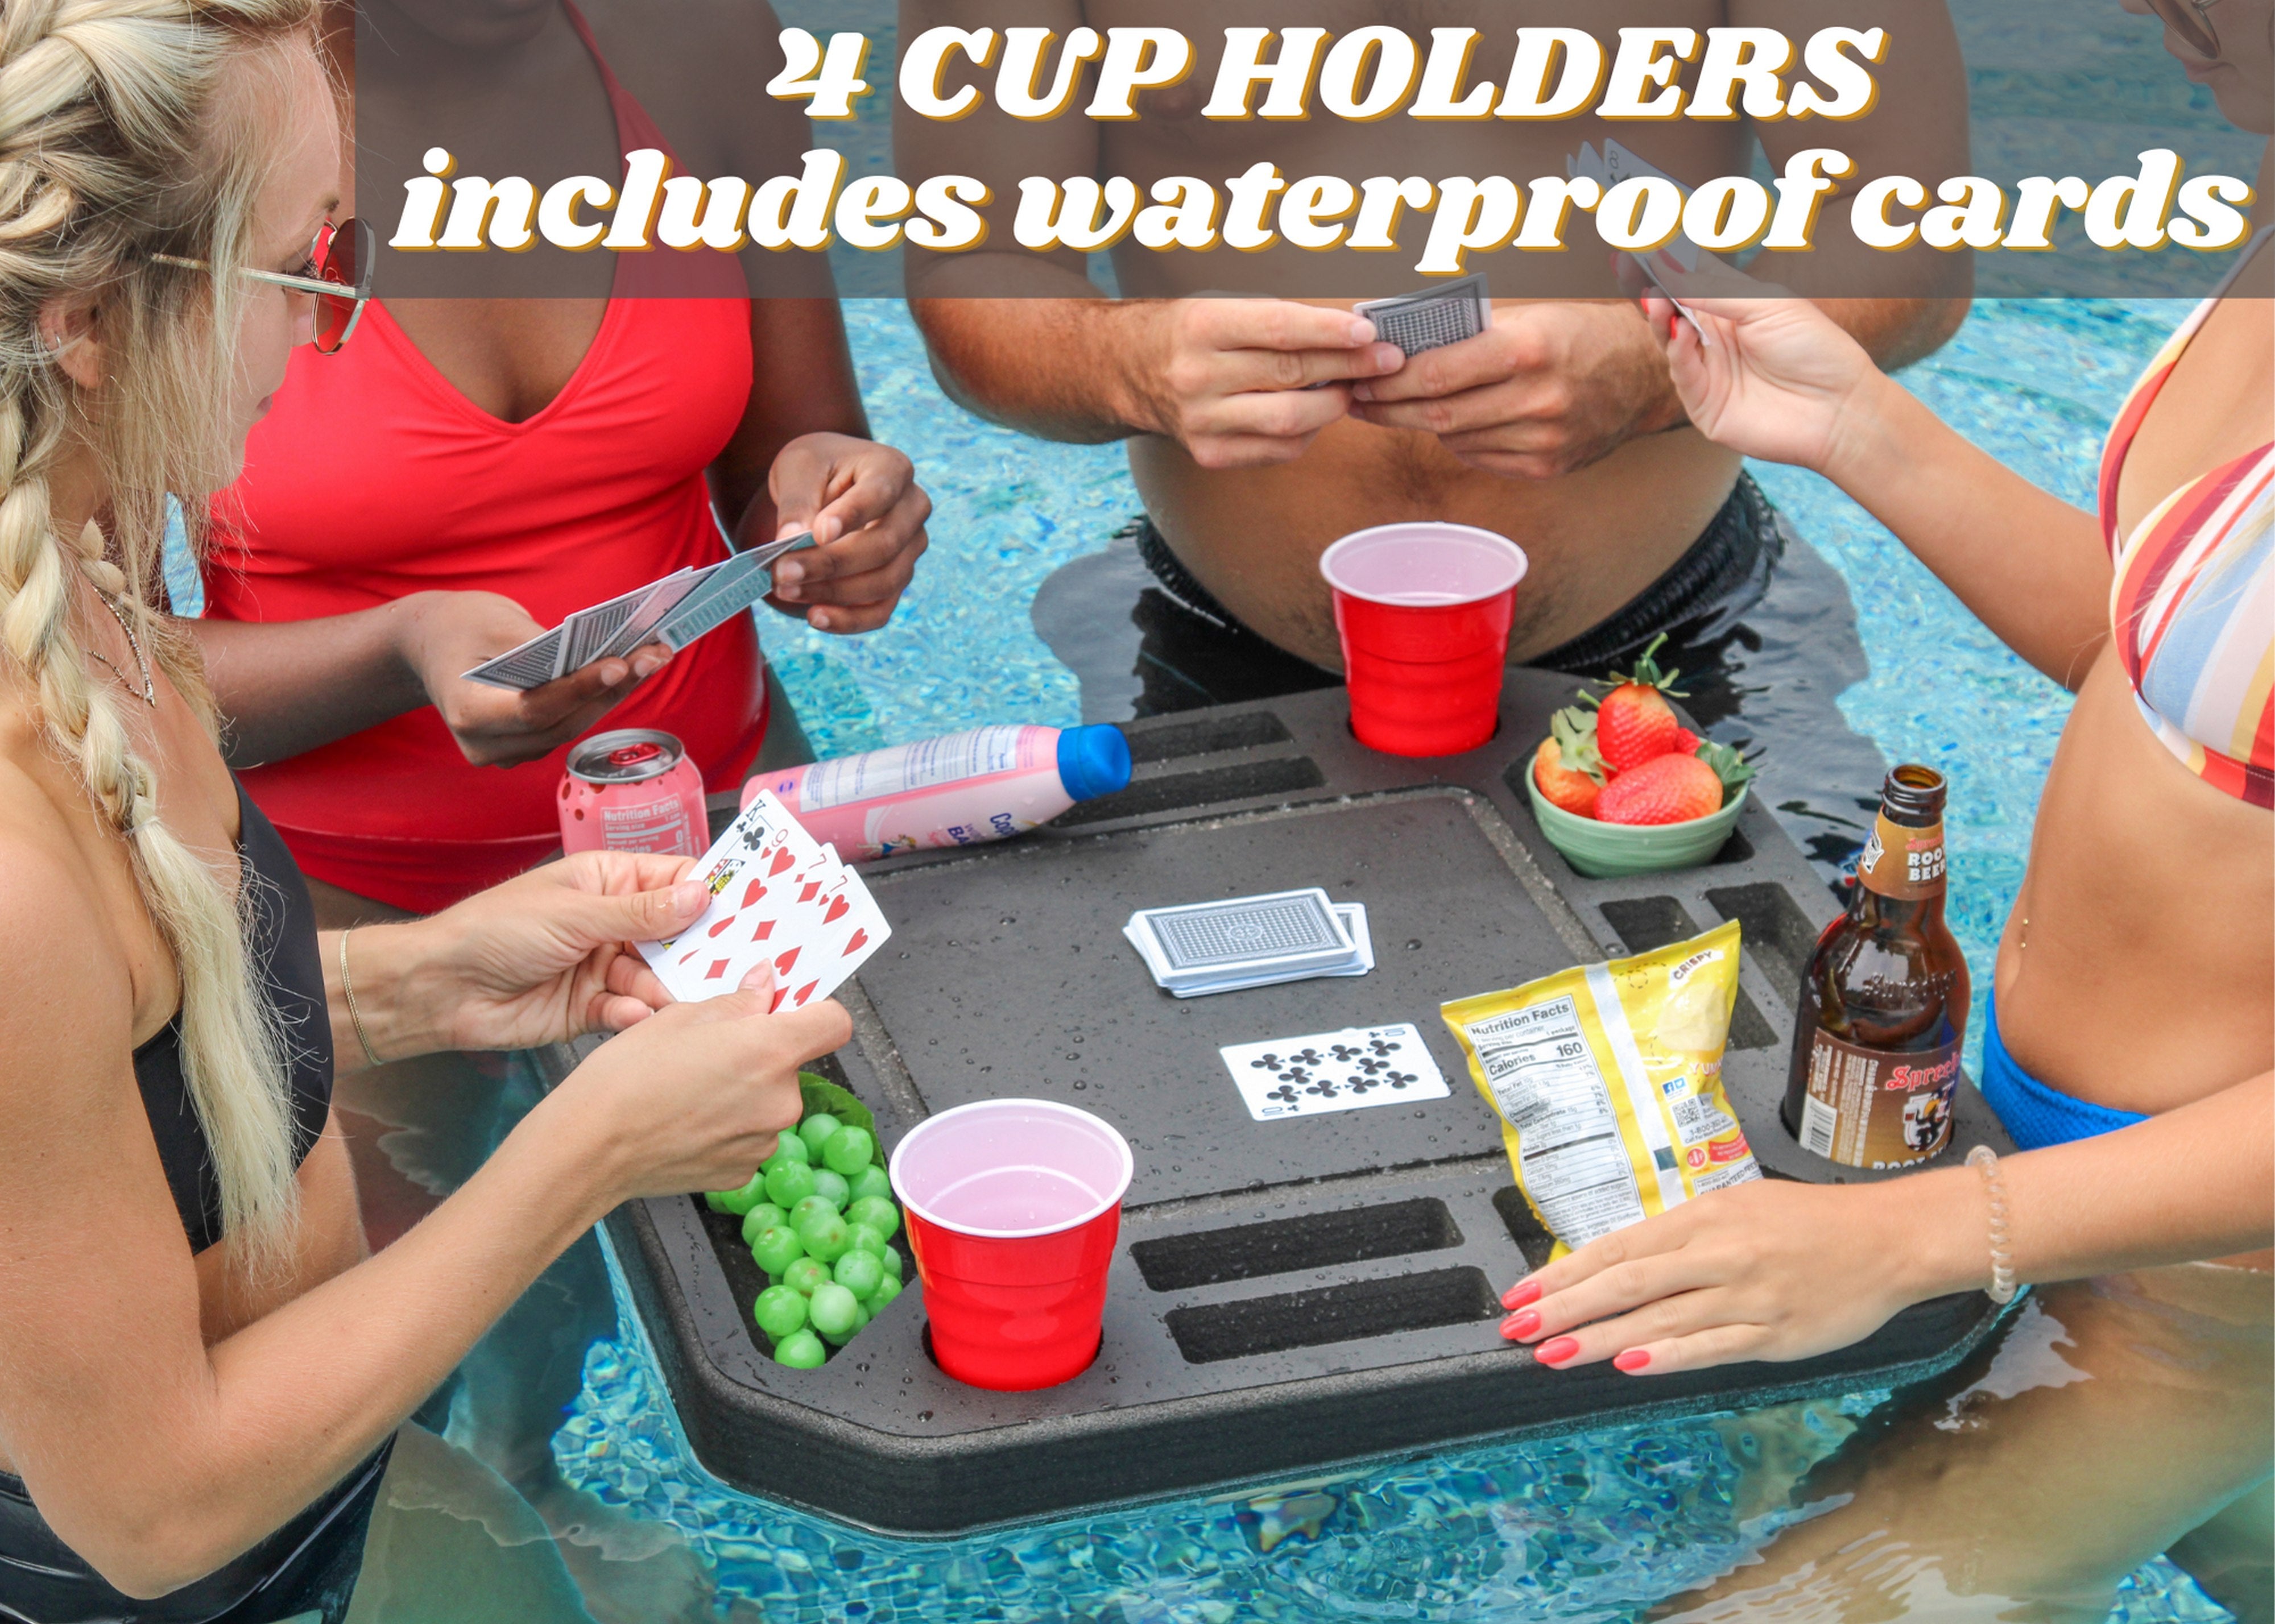 Floating Medium Poker Table Pool Float Includes Waterproof Playing Cards 23"